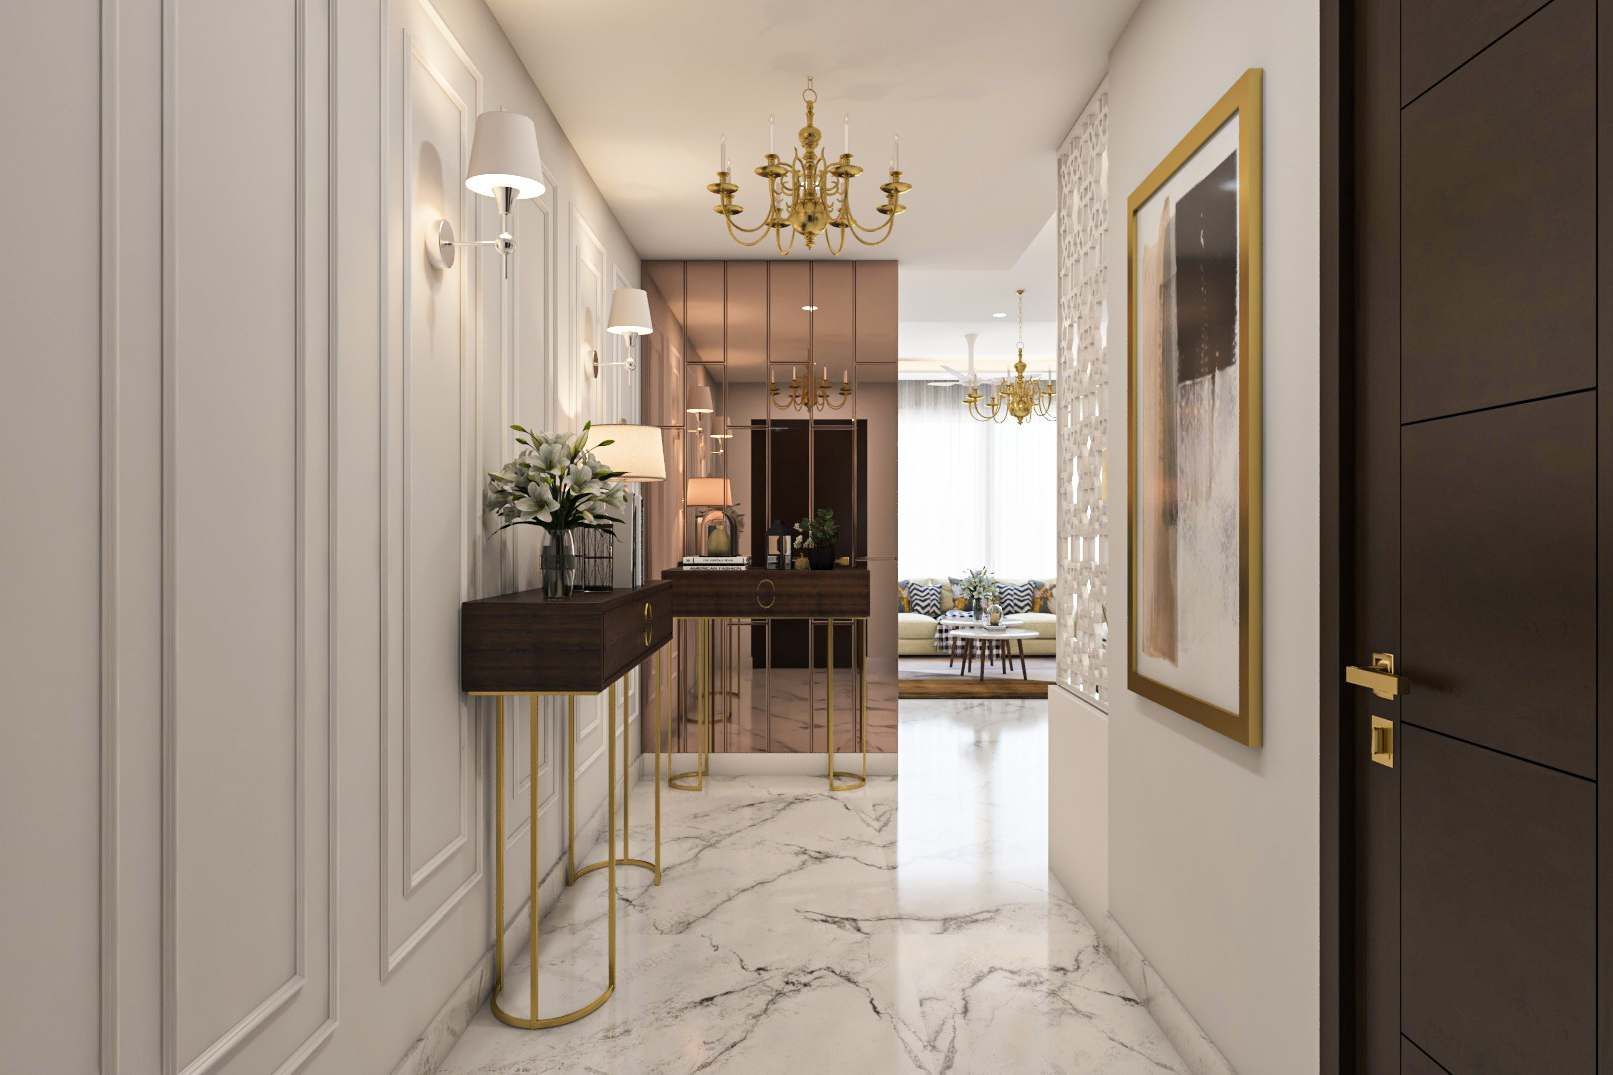 Classic Foyer Design With Golden Chandelier And Trendy Console Tables